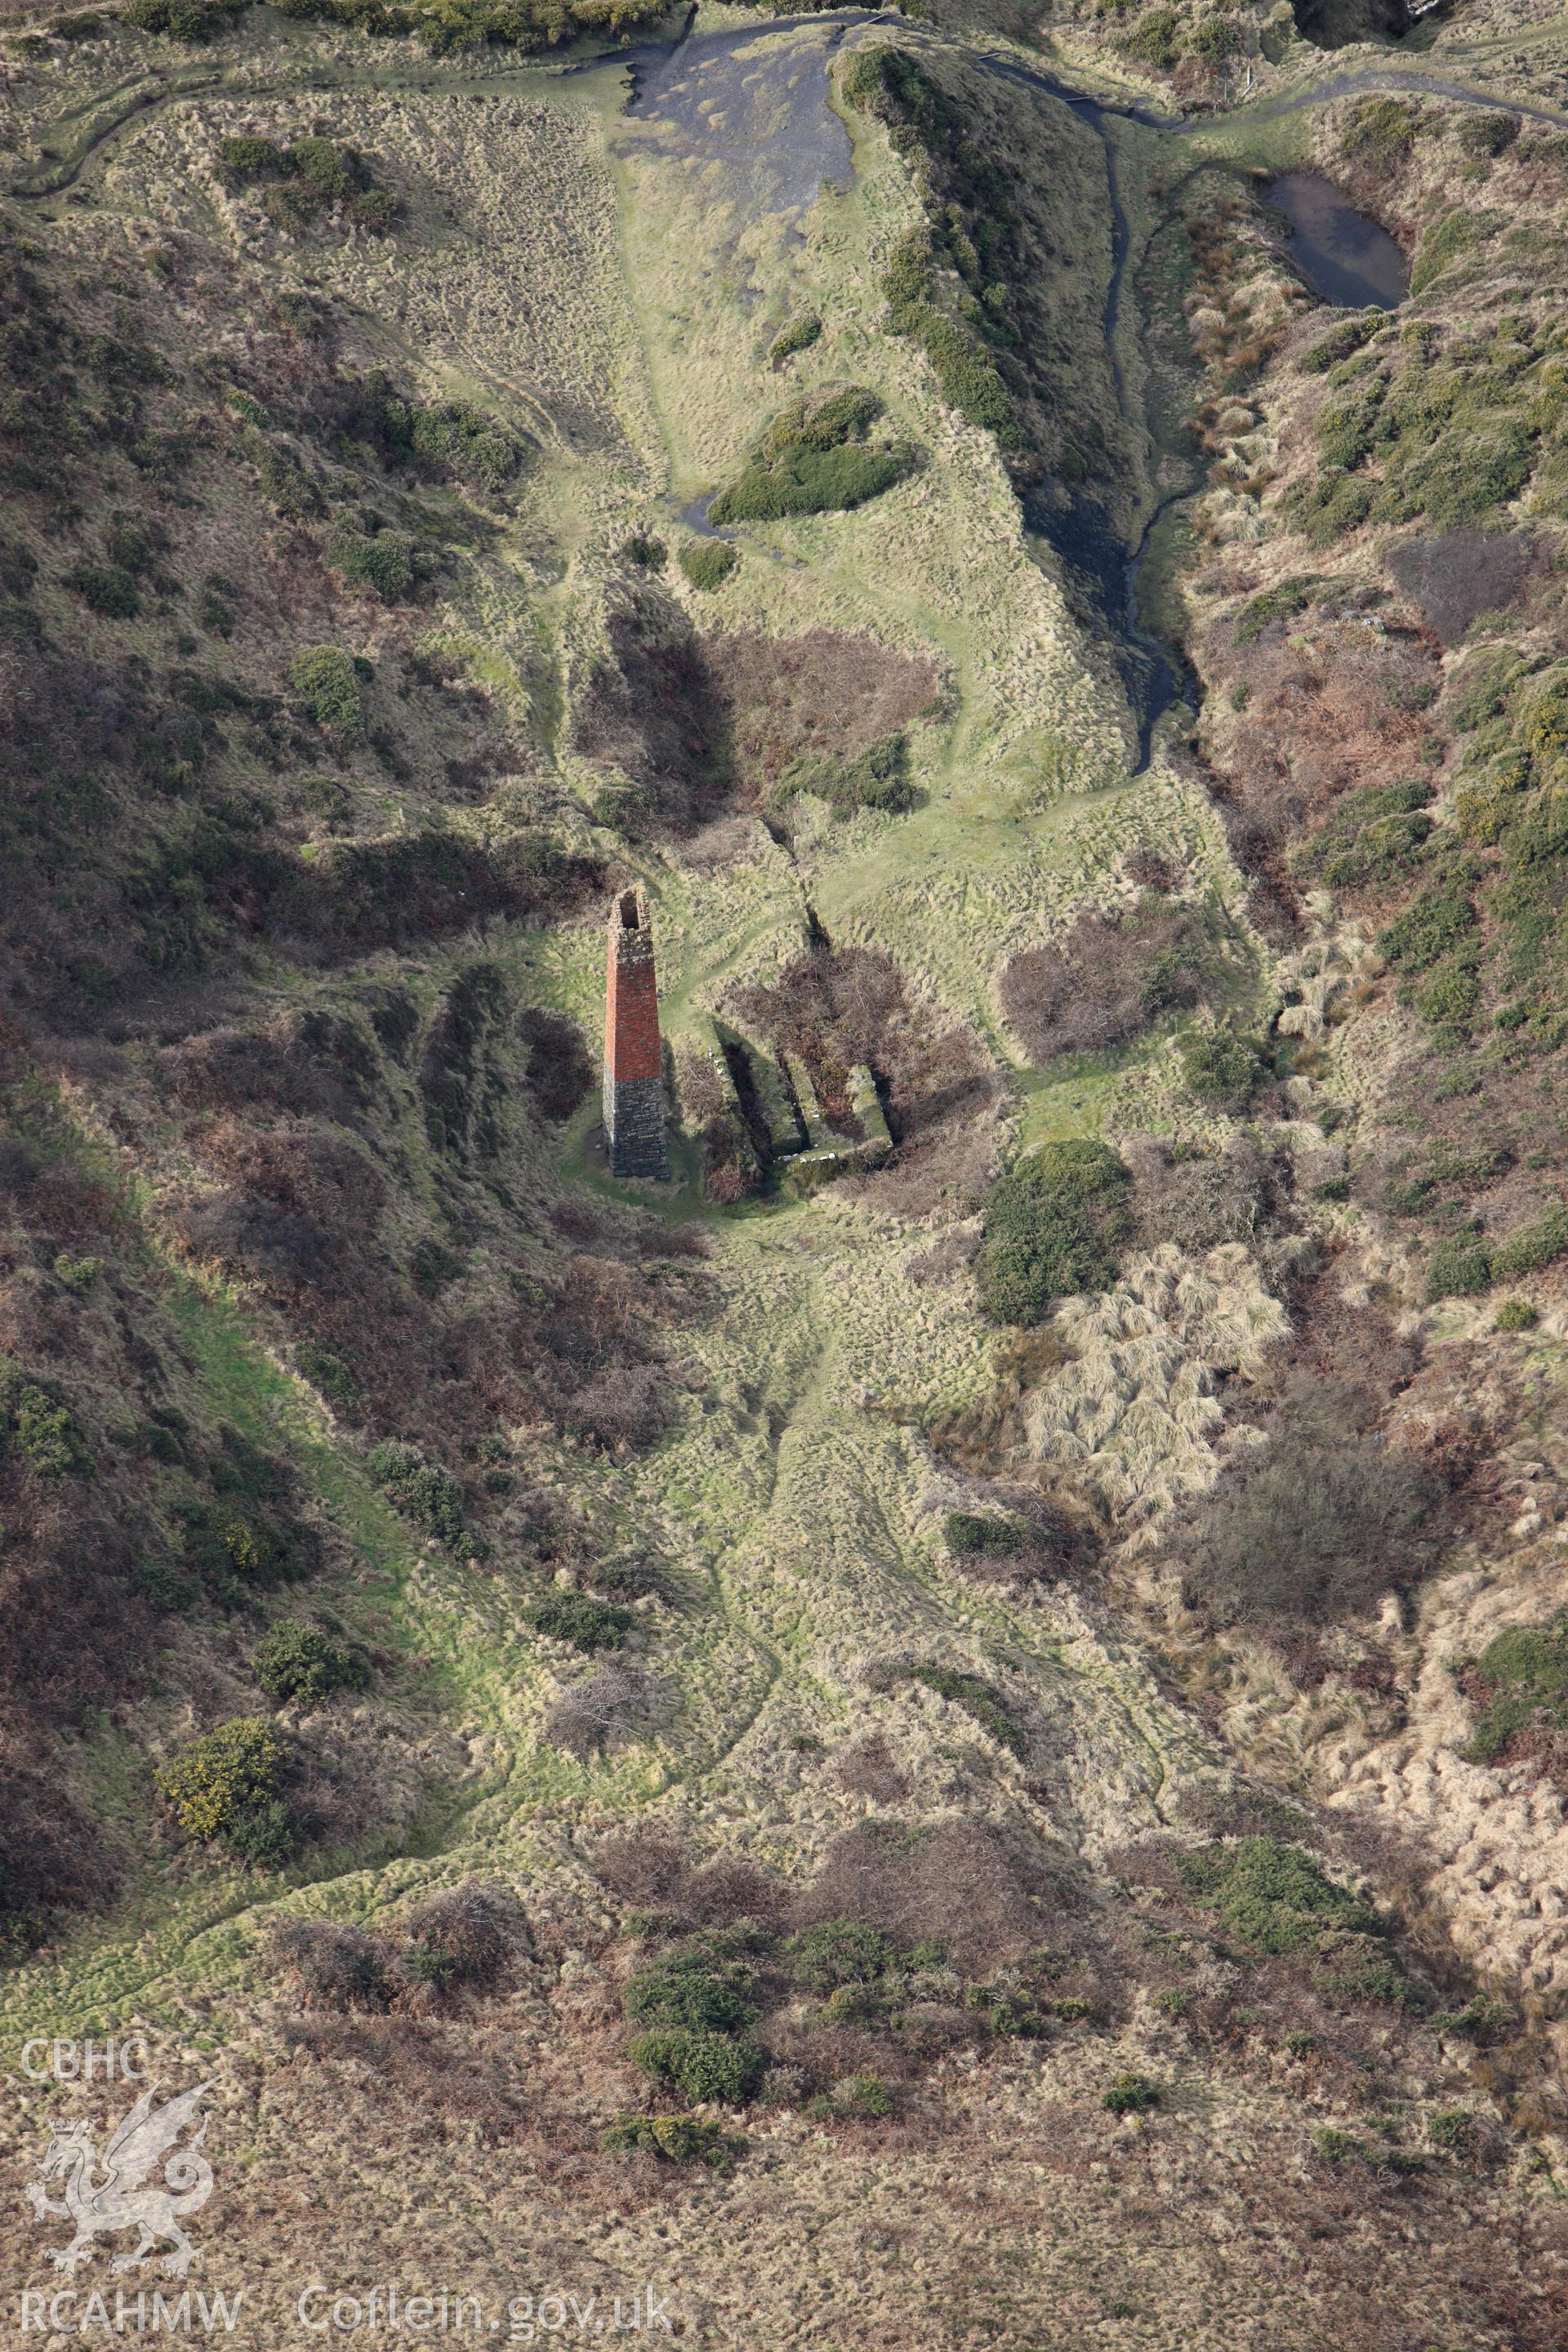 RCAHMW colour oblique aerial photograph of Trefran Cliff Colliery. Taken on 02 March 2010 by Toby Driver